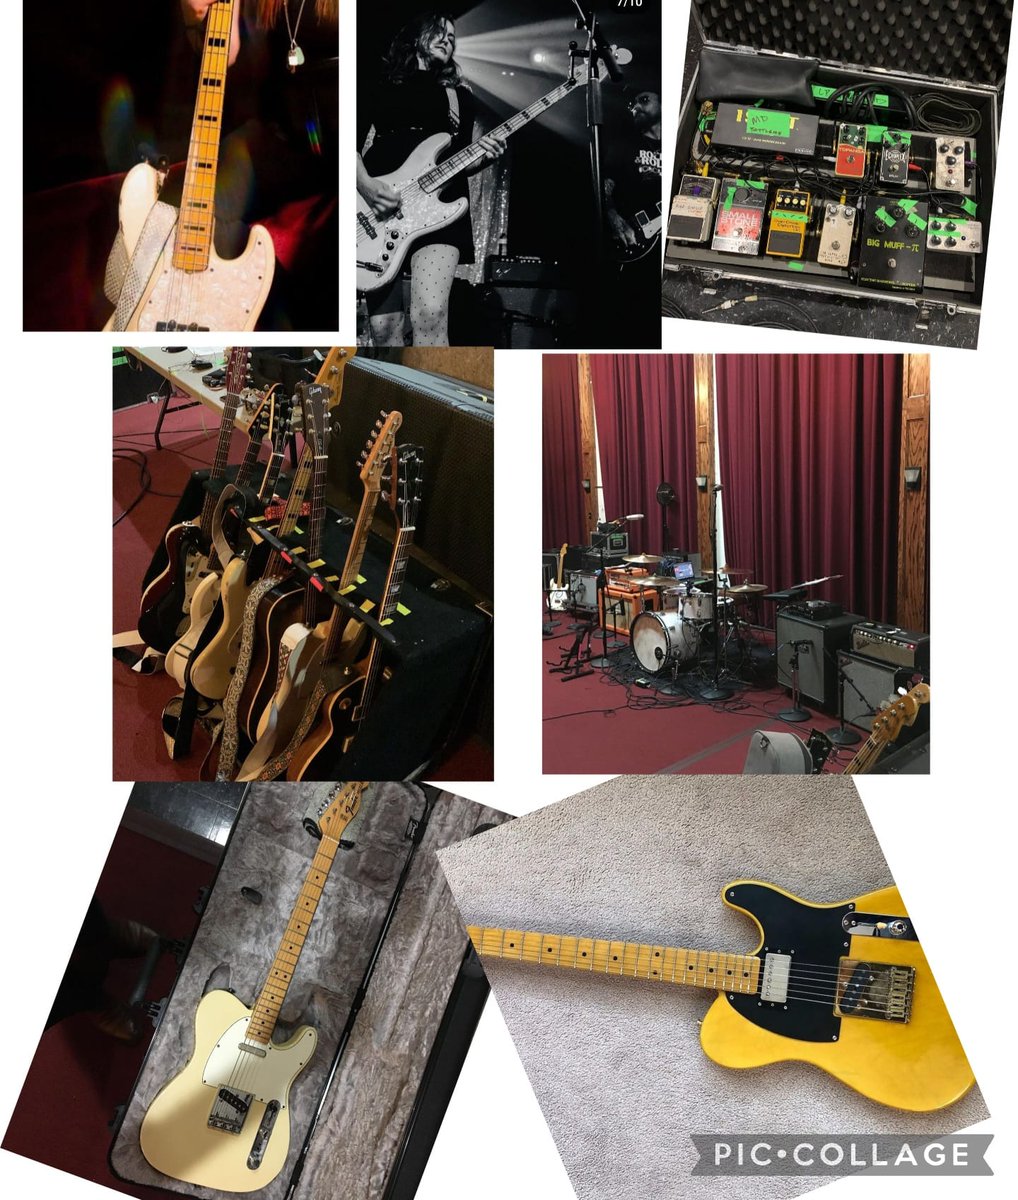 My friend Nicole Fiorentino (former bassist of Smashing Pumpkins) is on tour with Louise Post (Veruca Salt). The whole band had all their equipment stolen in Denver. For them, it's not just equipment. It's their life, memories, and sentimental values. The equipment was priceless…